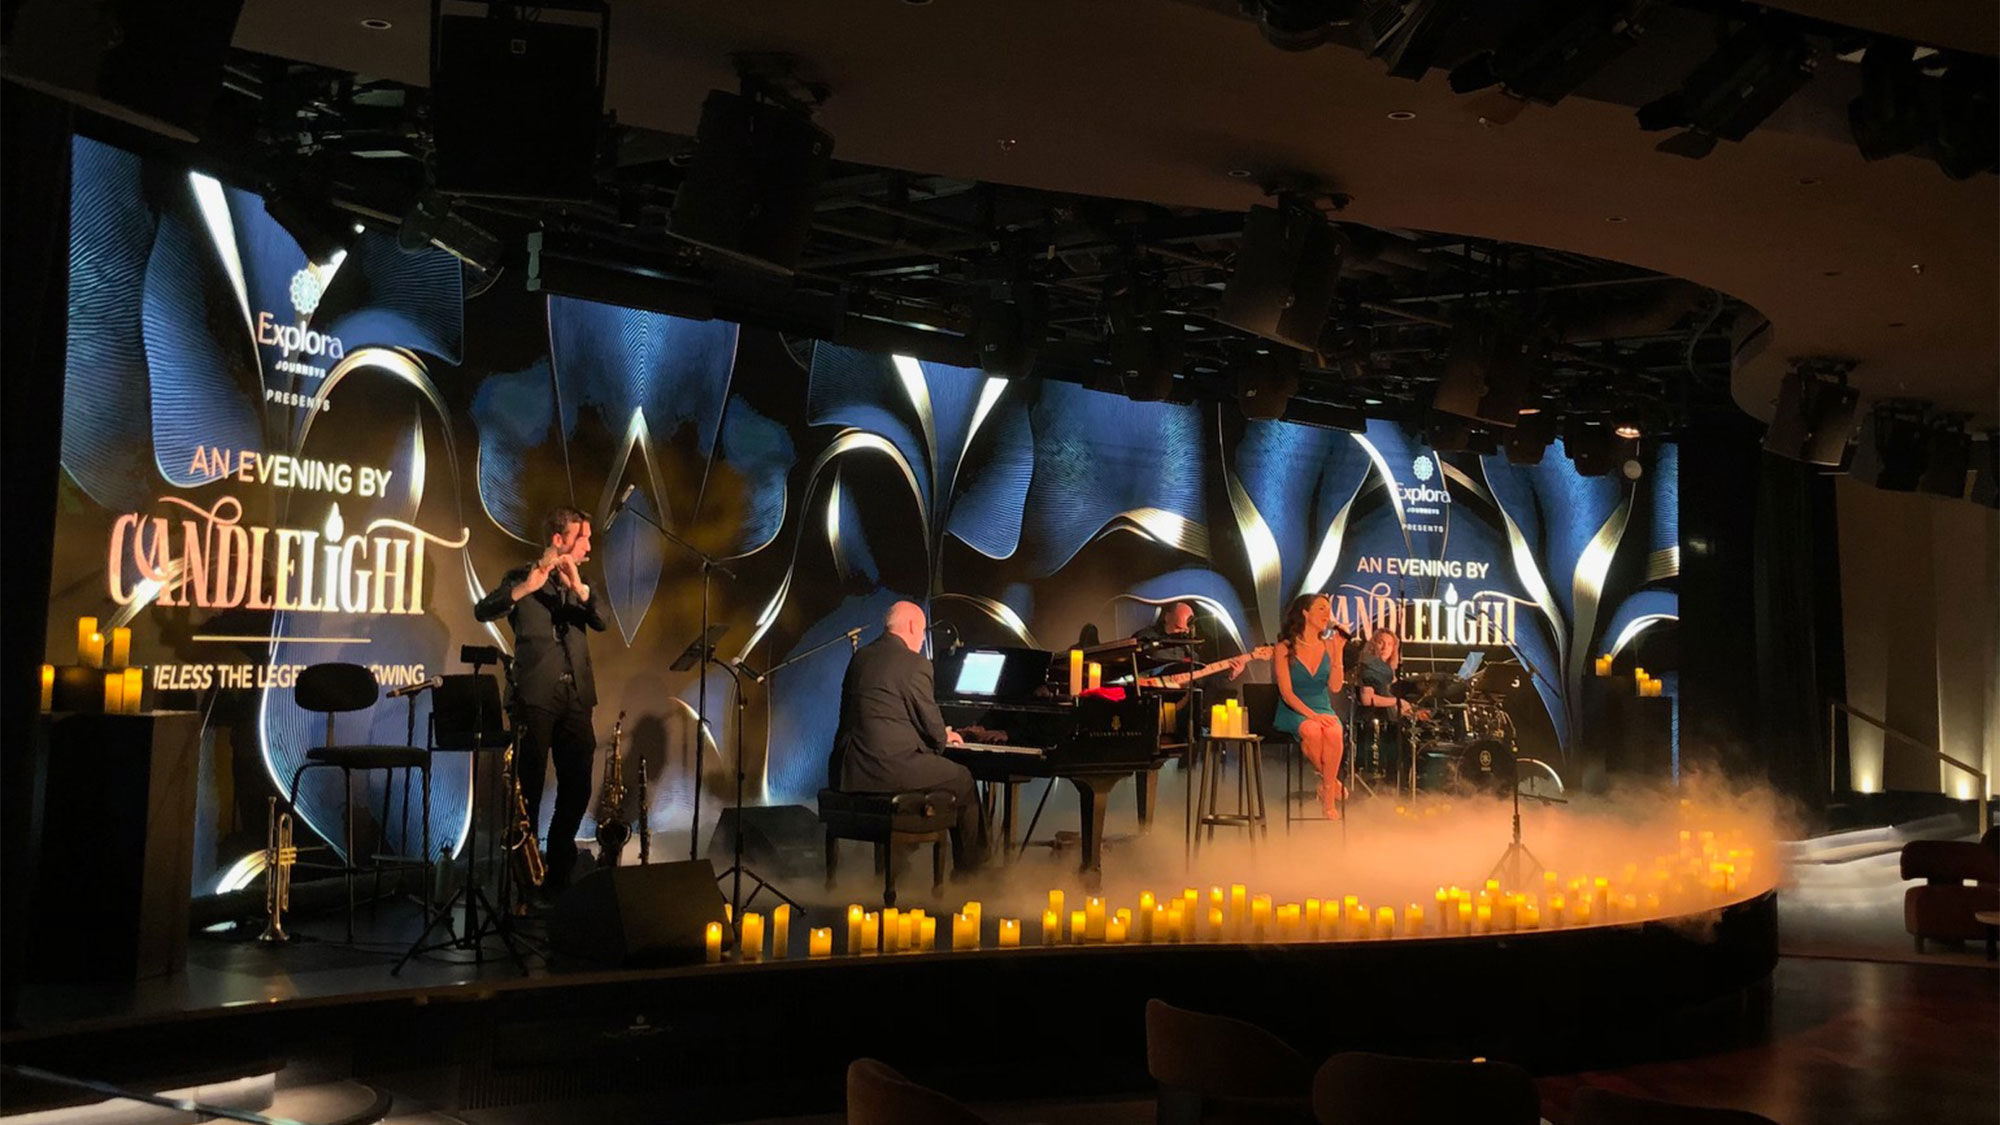 The main show lounge on Explora I features a series of "An Evening By Candlelight" musical presentations.